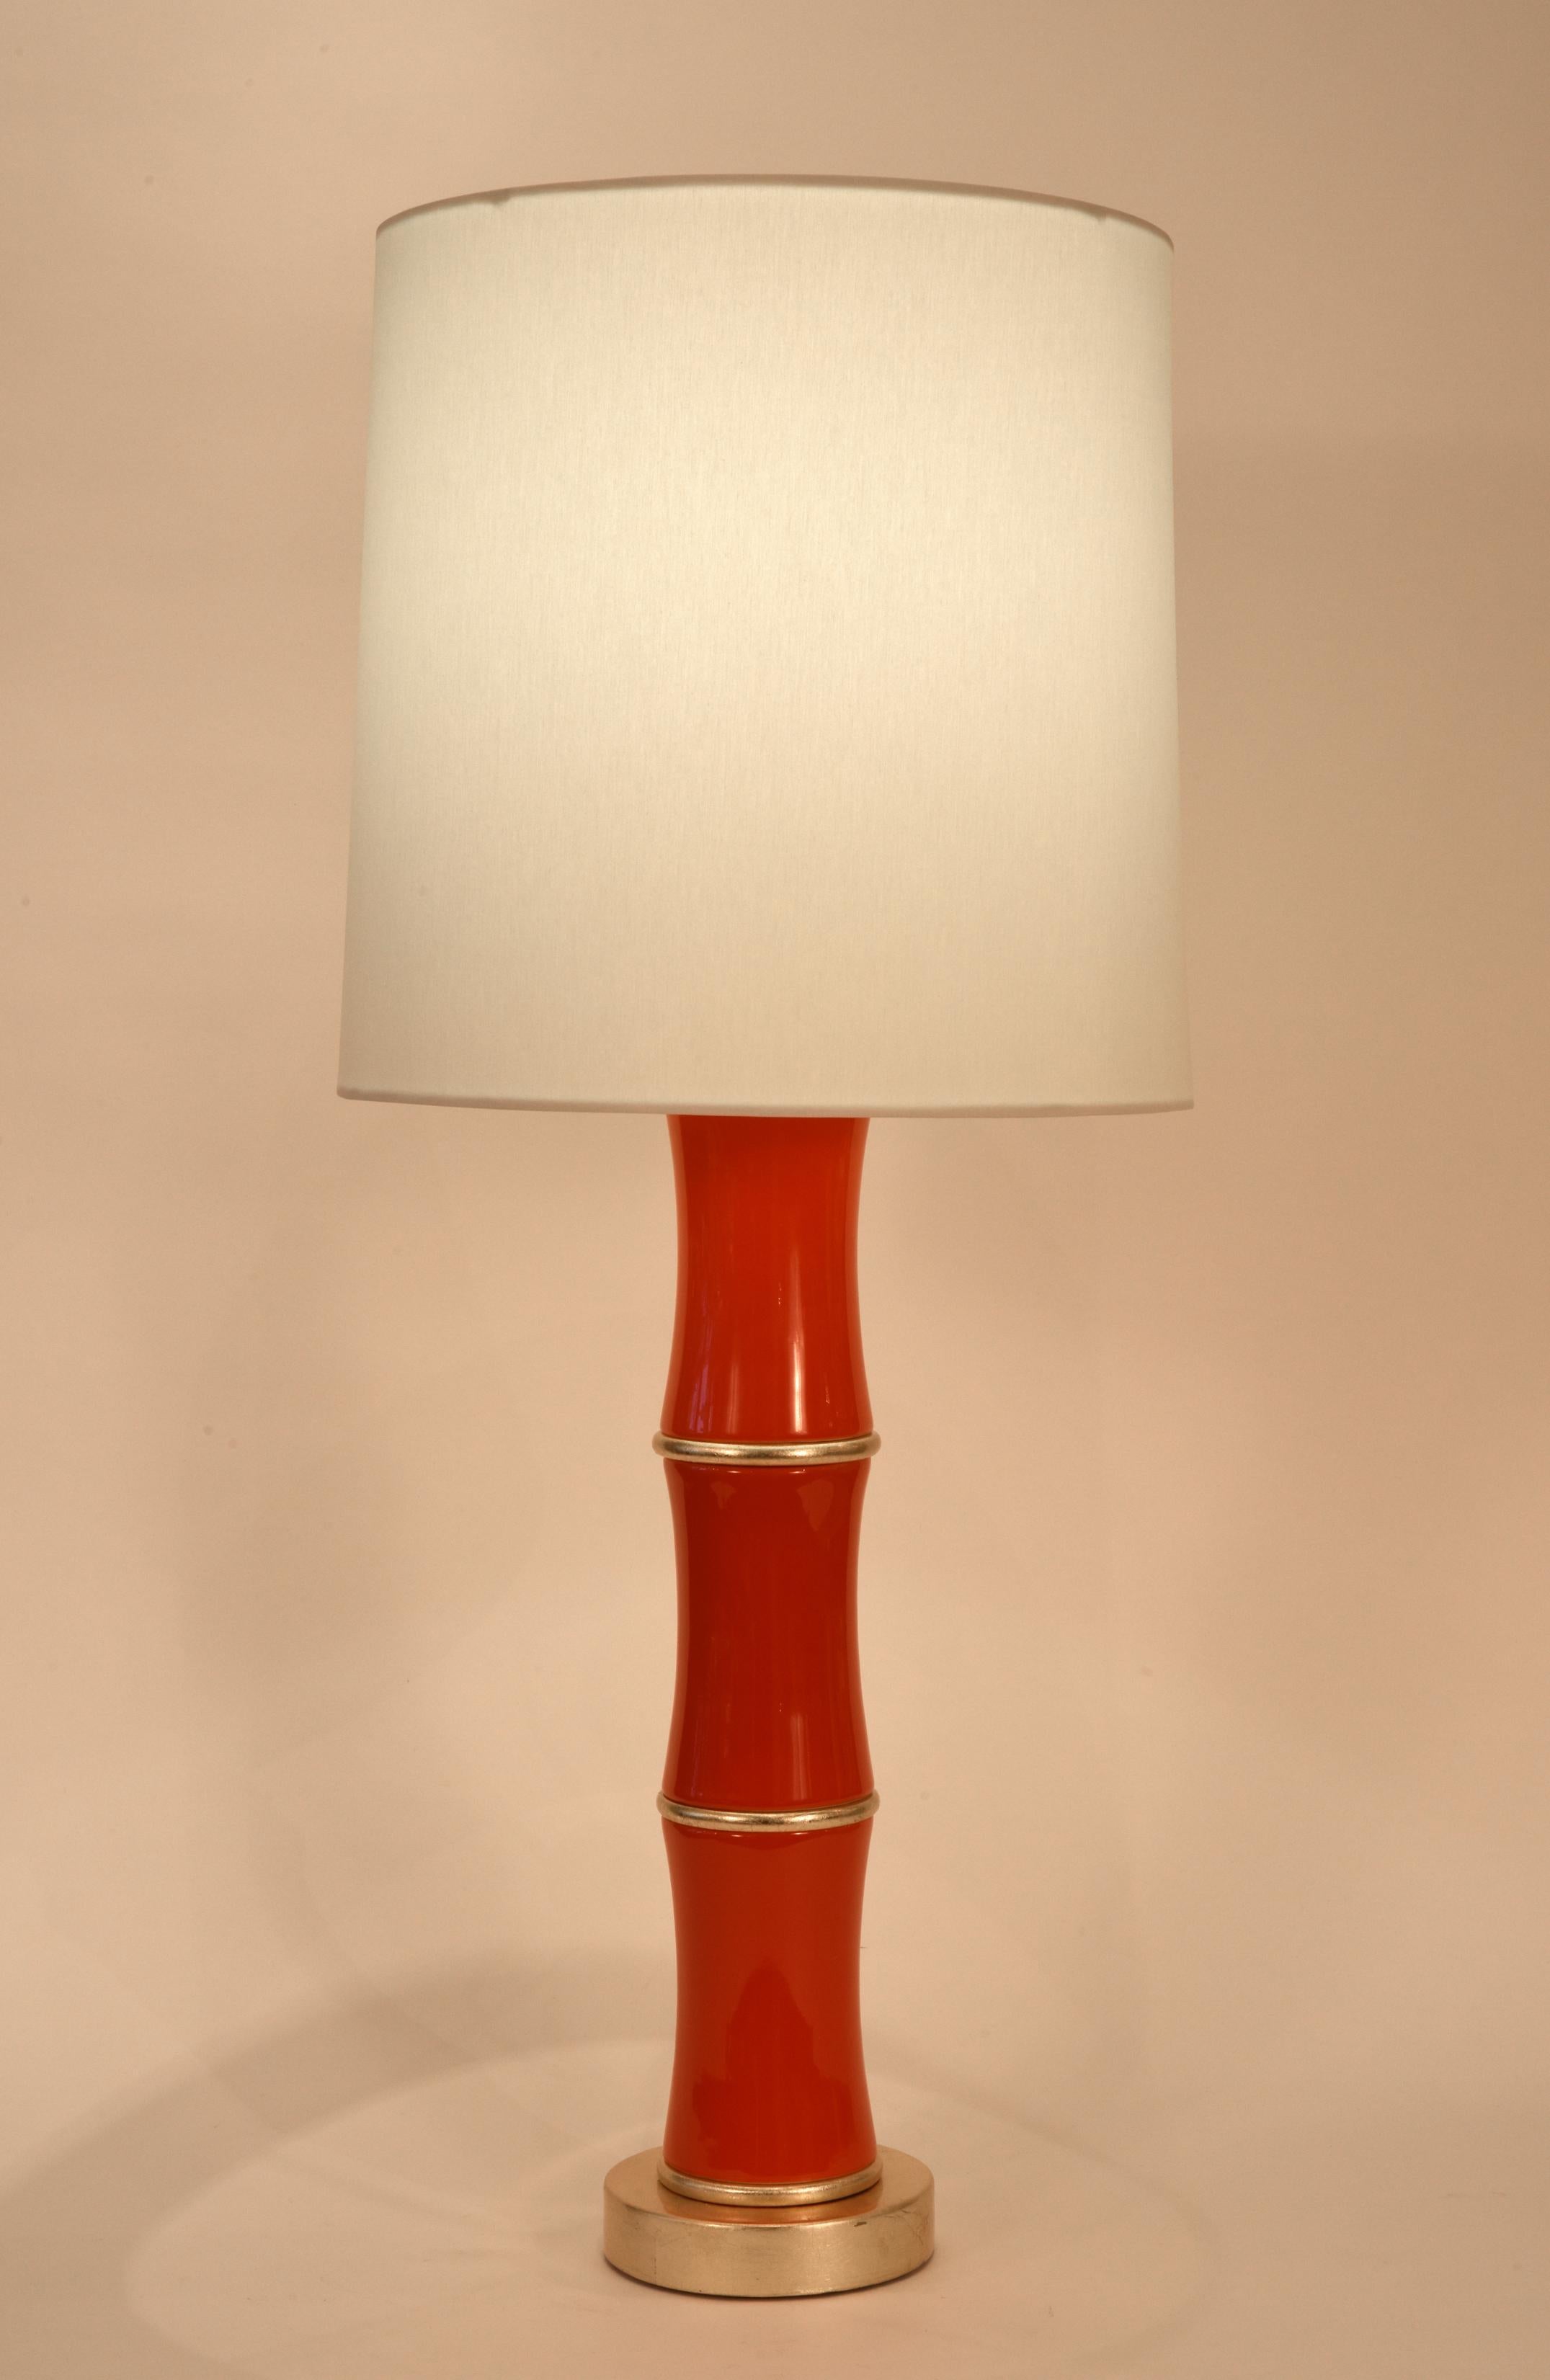 Pair orange porcelain task or table lamp with gold leaf wood base. Each lamp is in excellent condition, rewired for US use. Each lamps come with a round drum shade with silk exterior. Each measure shade measure 13 inches x 13.5 inches x 14 inches.